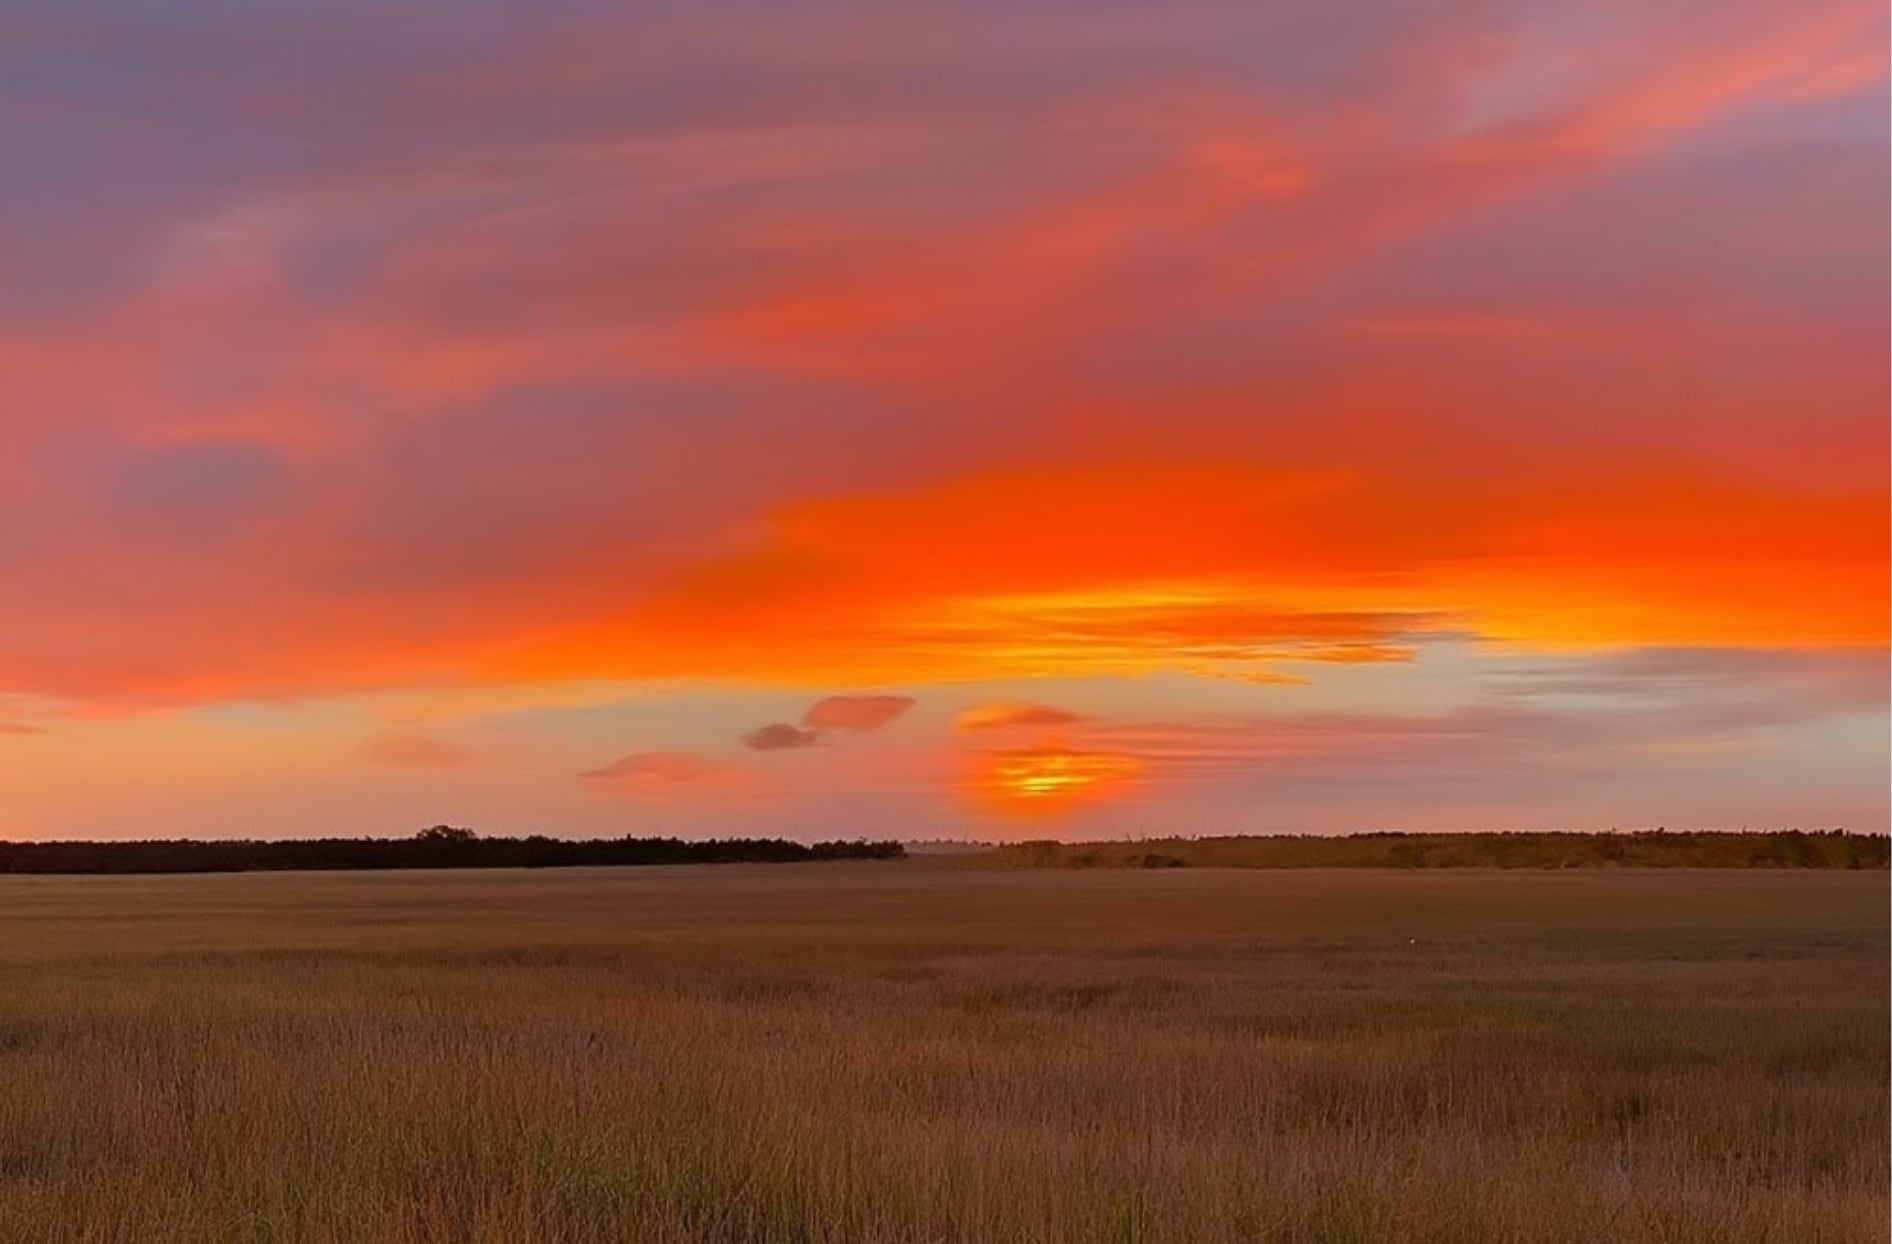 A photo of a sunset in the prairies at dusk